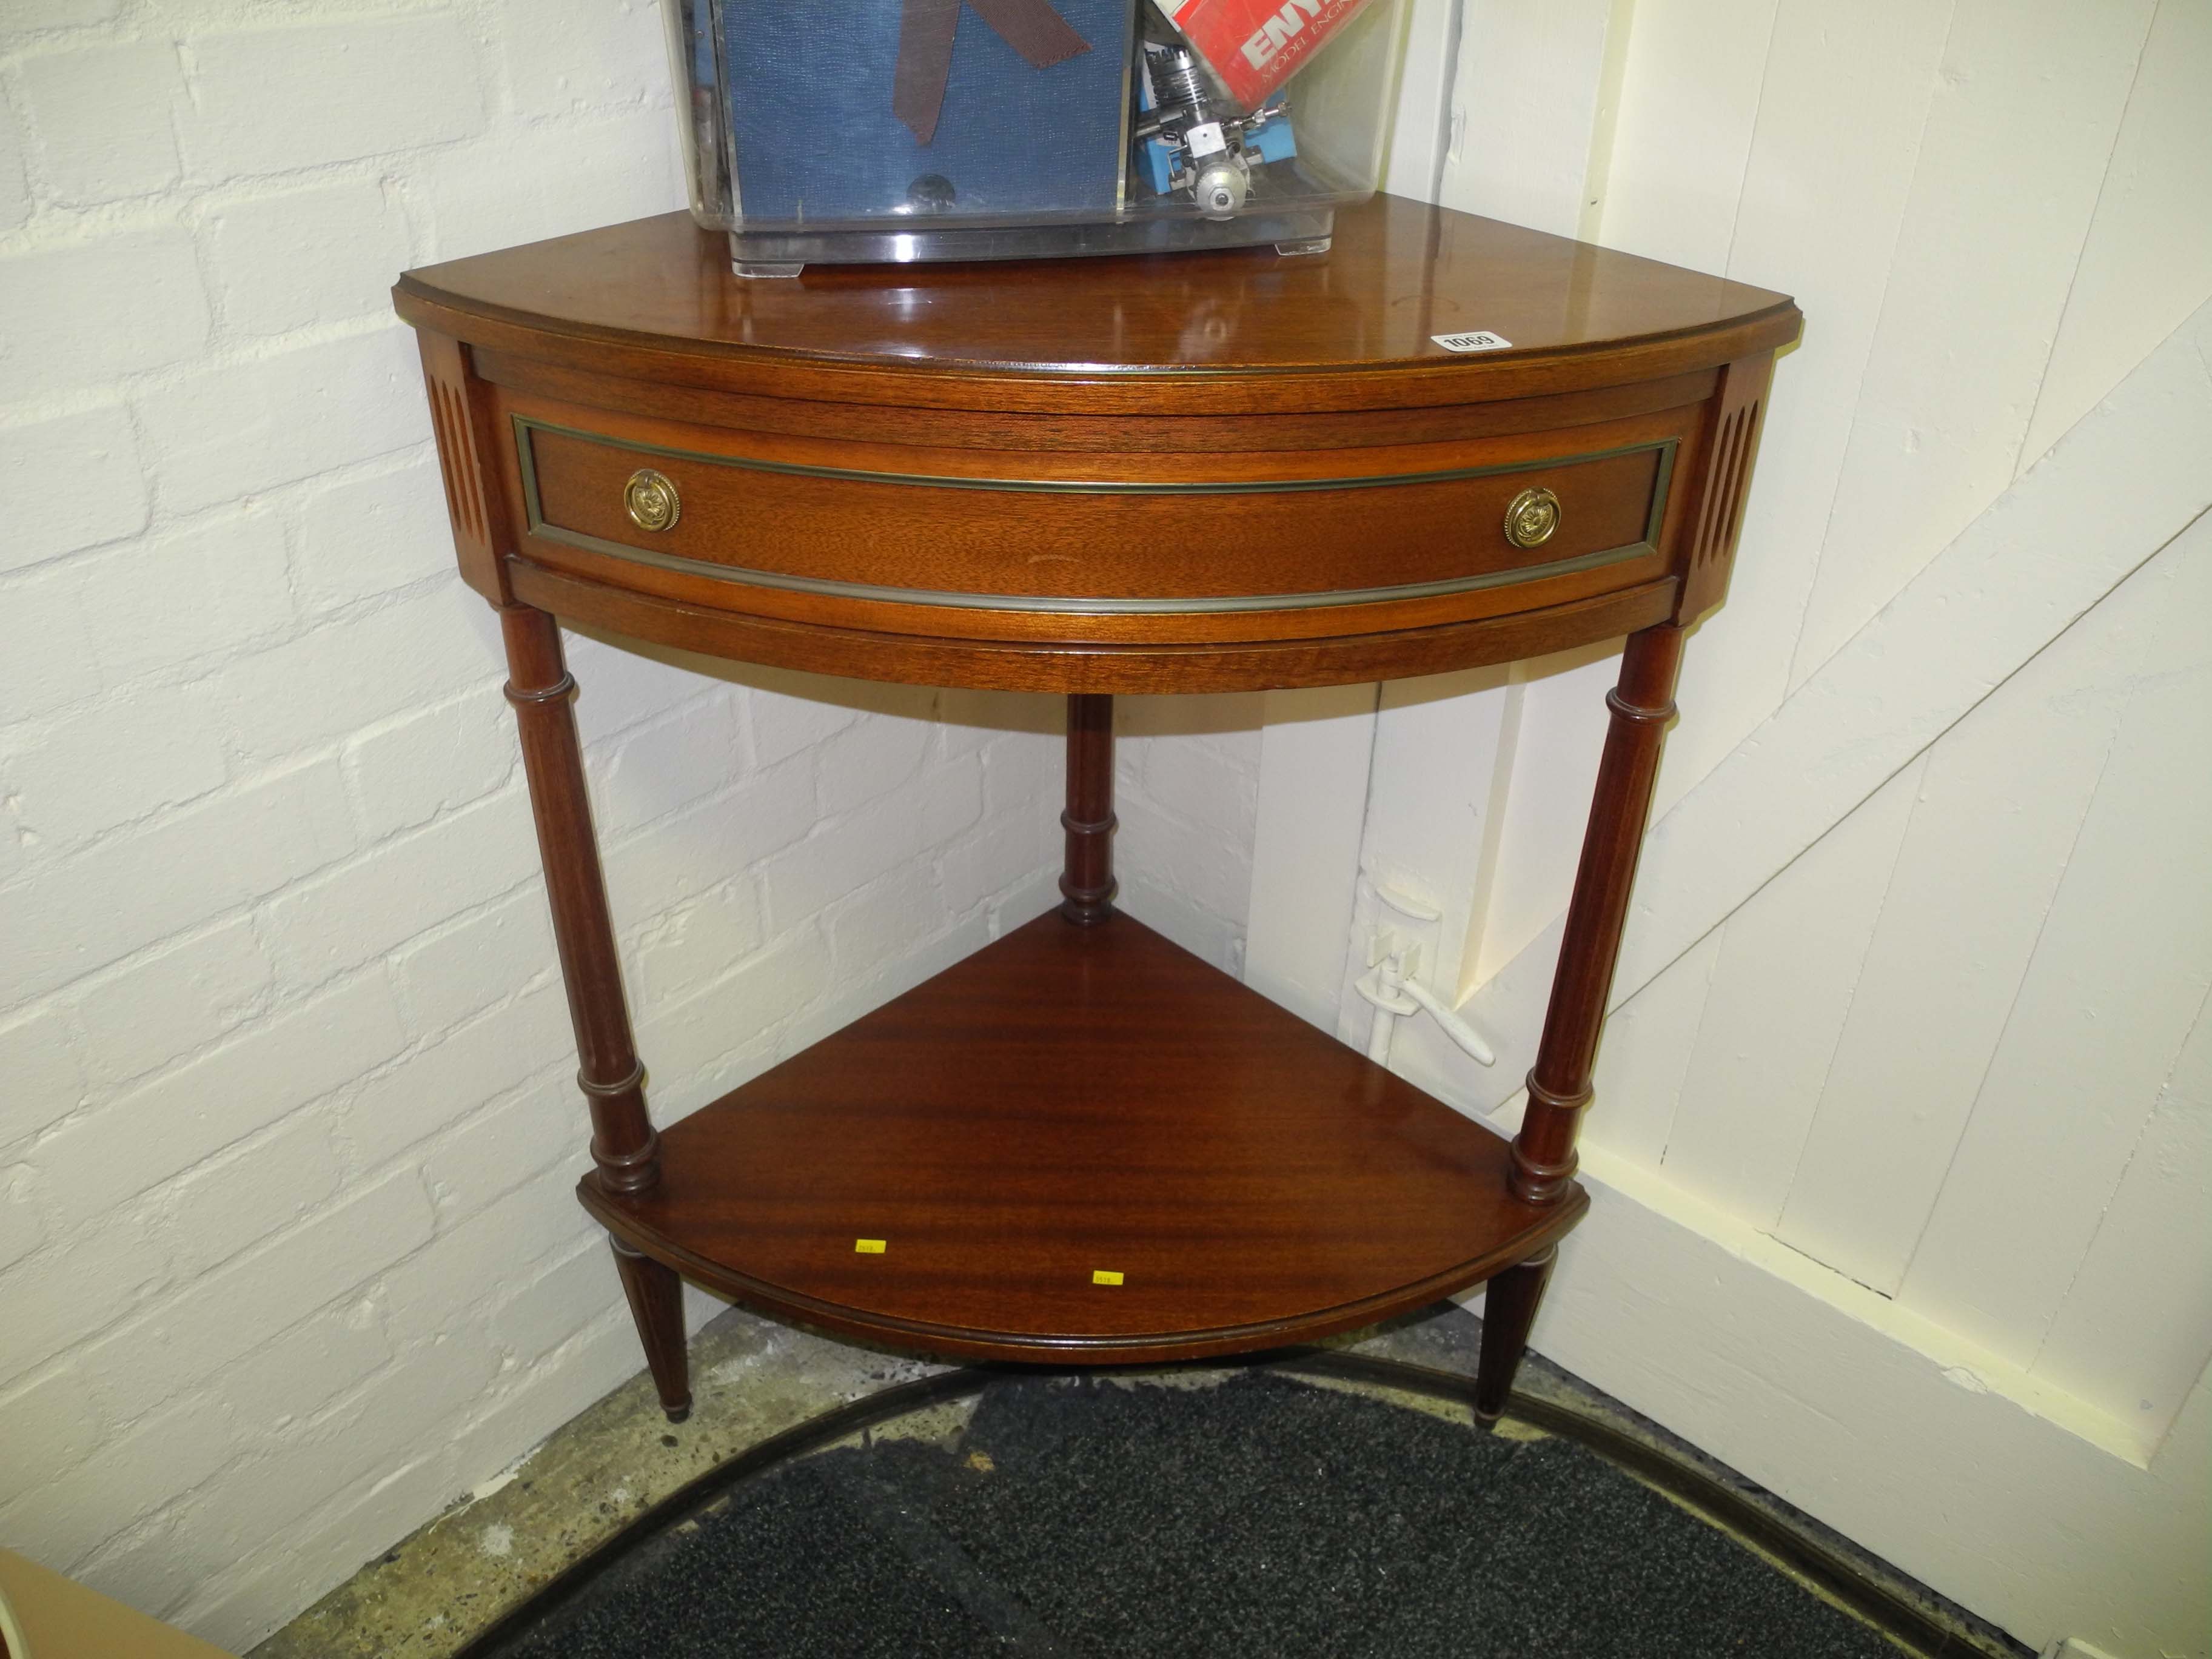 A Georgian style bow fronted corner table with frieze drawer on fluted legs joined by an undertier.